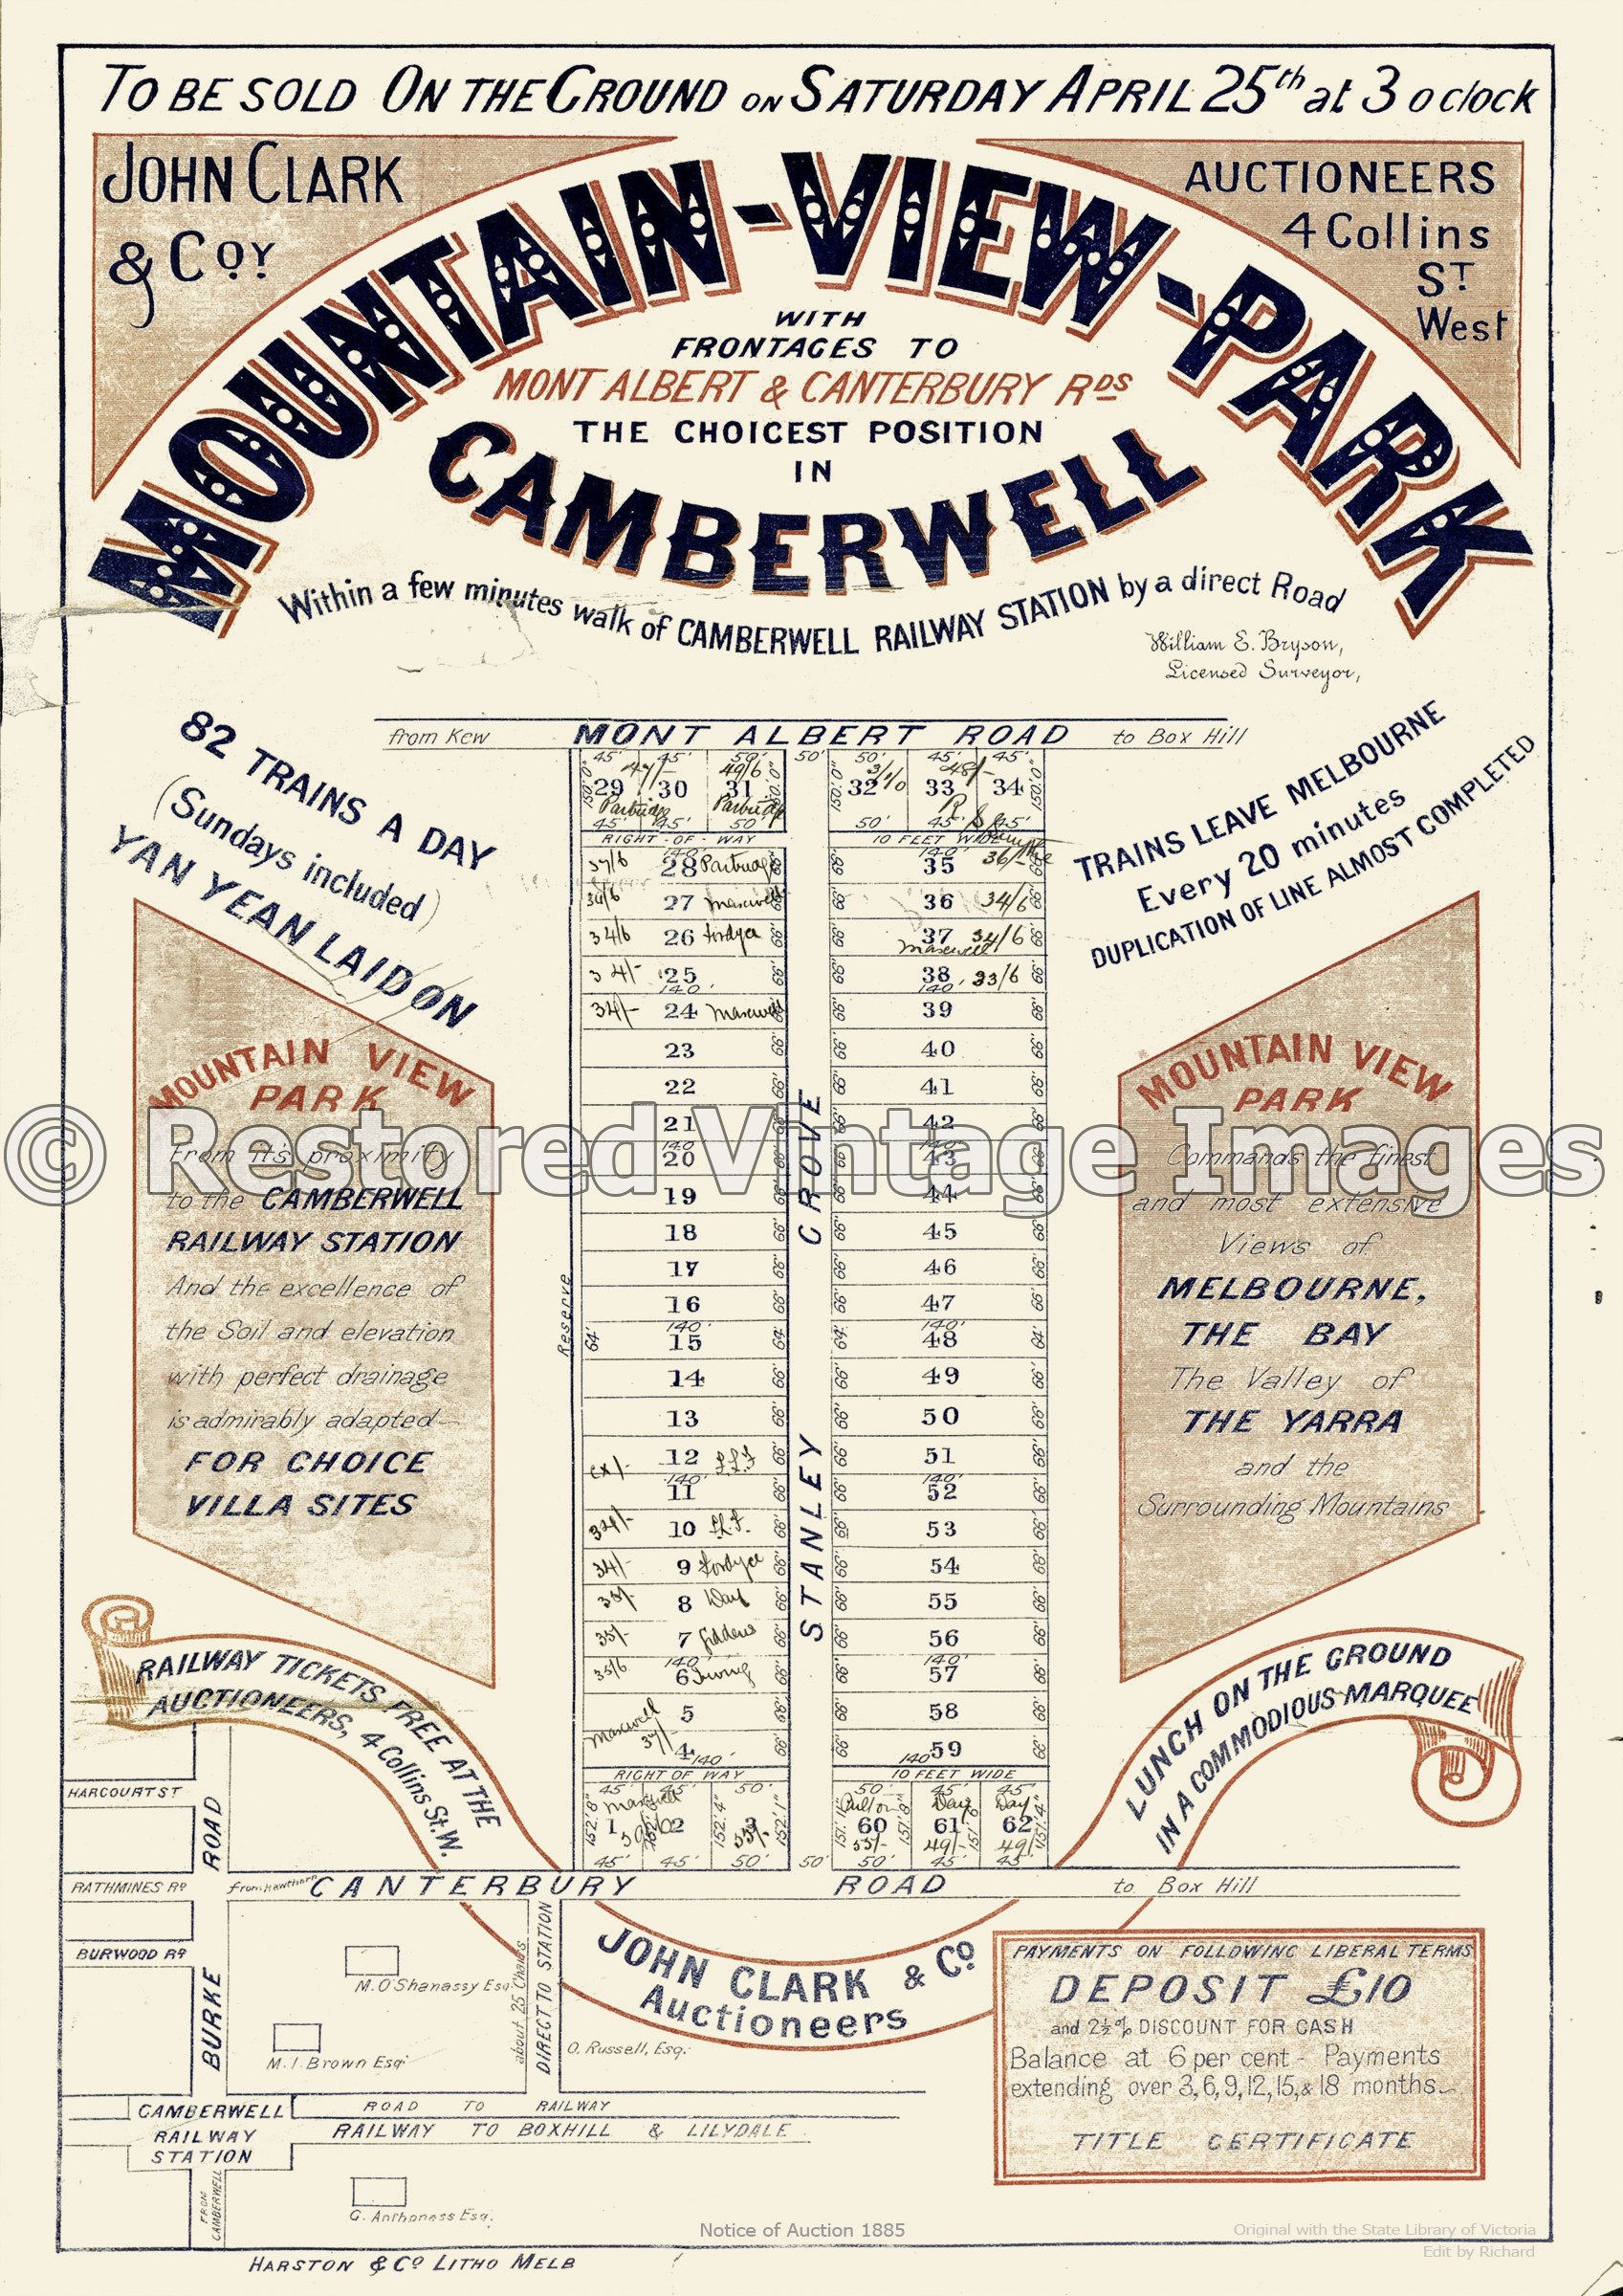 Mountain View Park 25th April 1885 – Camberwell/Canterbury